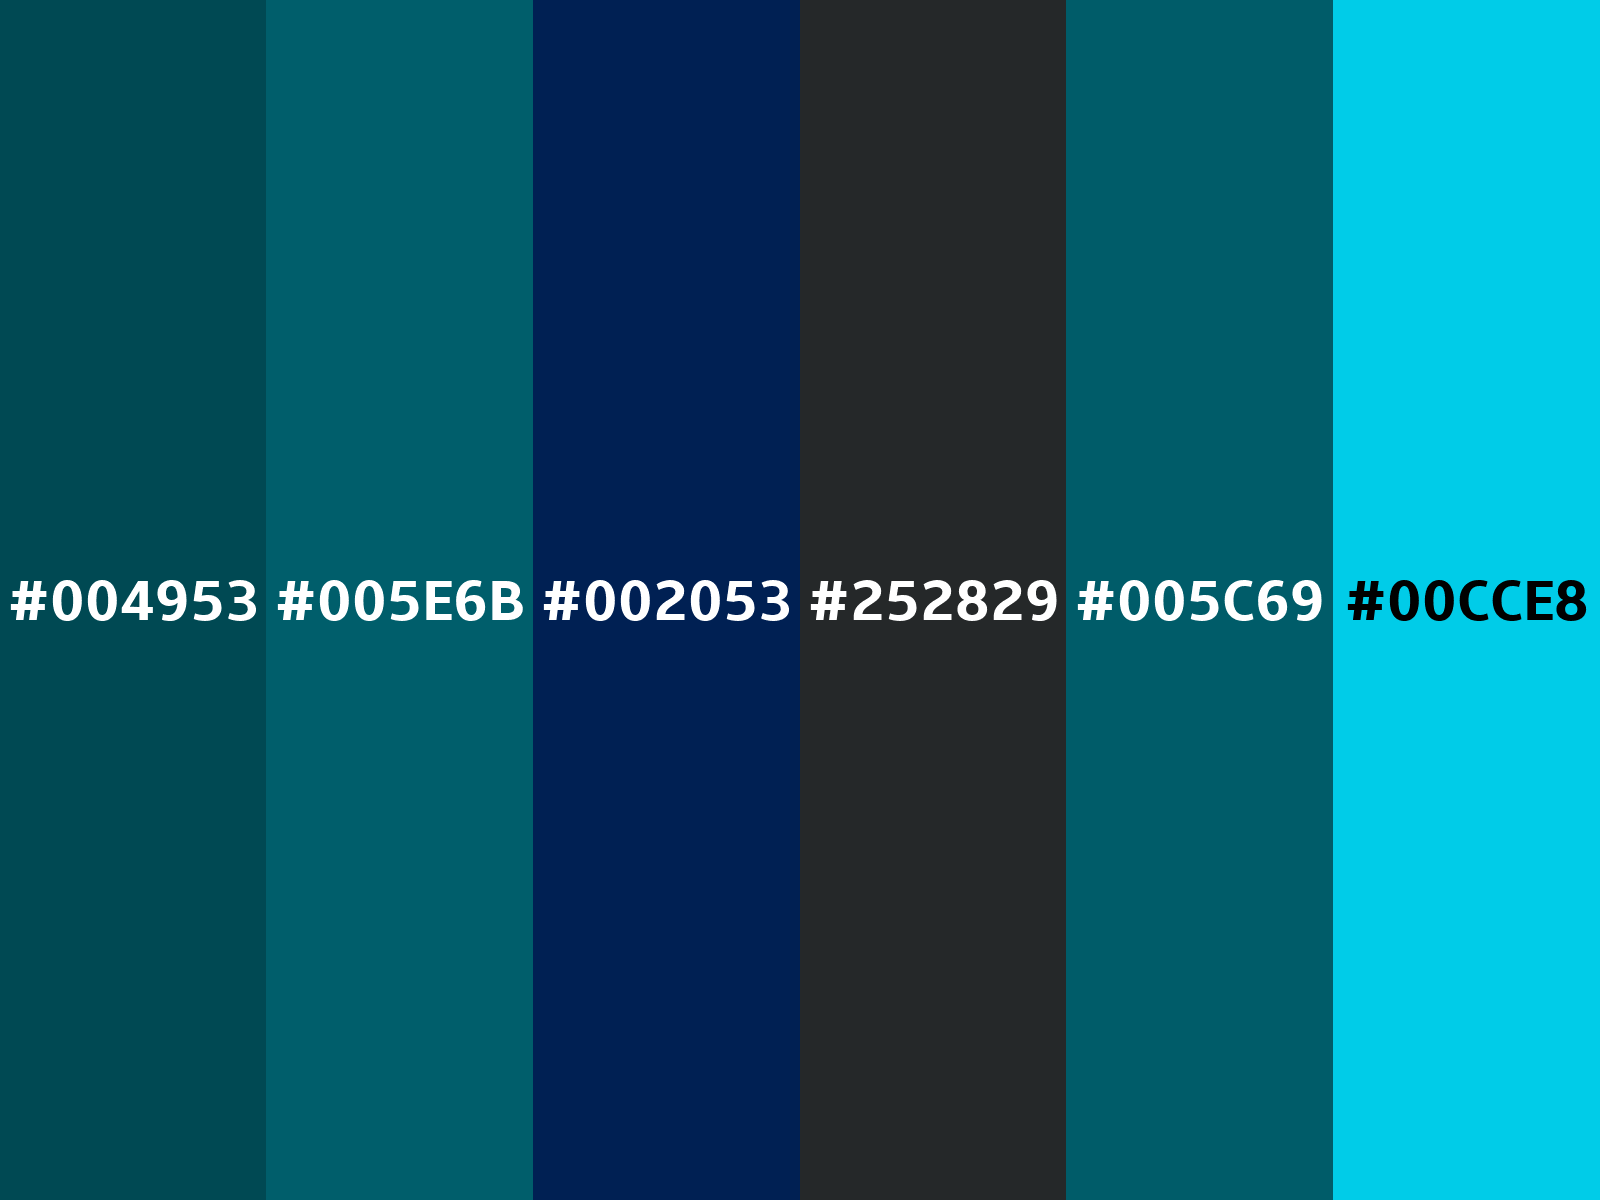 Midnight green (eagle green) color (Hex 004953)